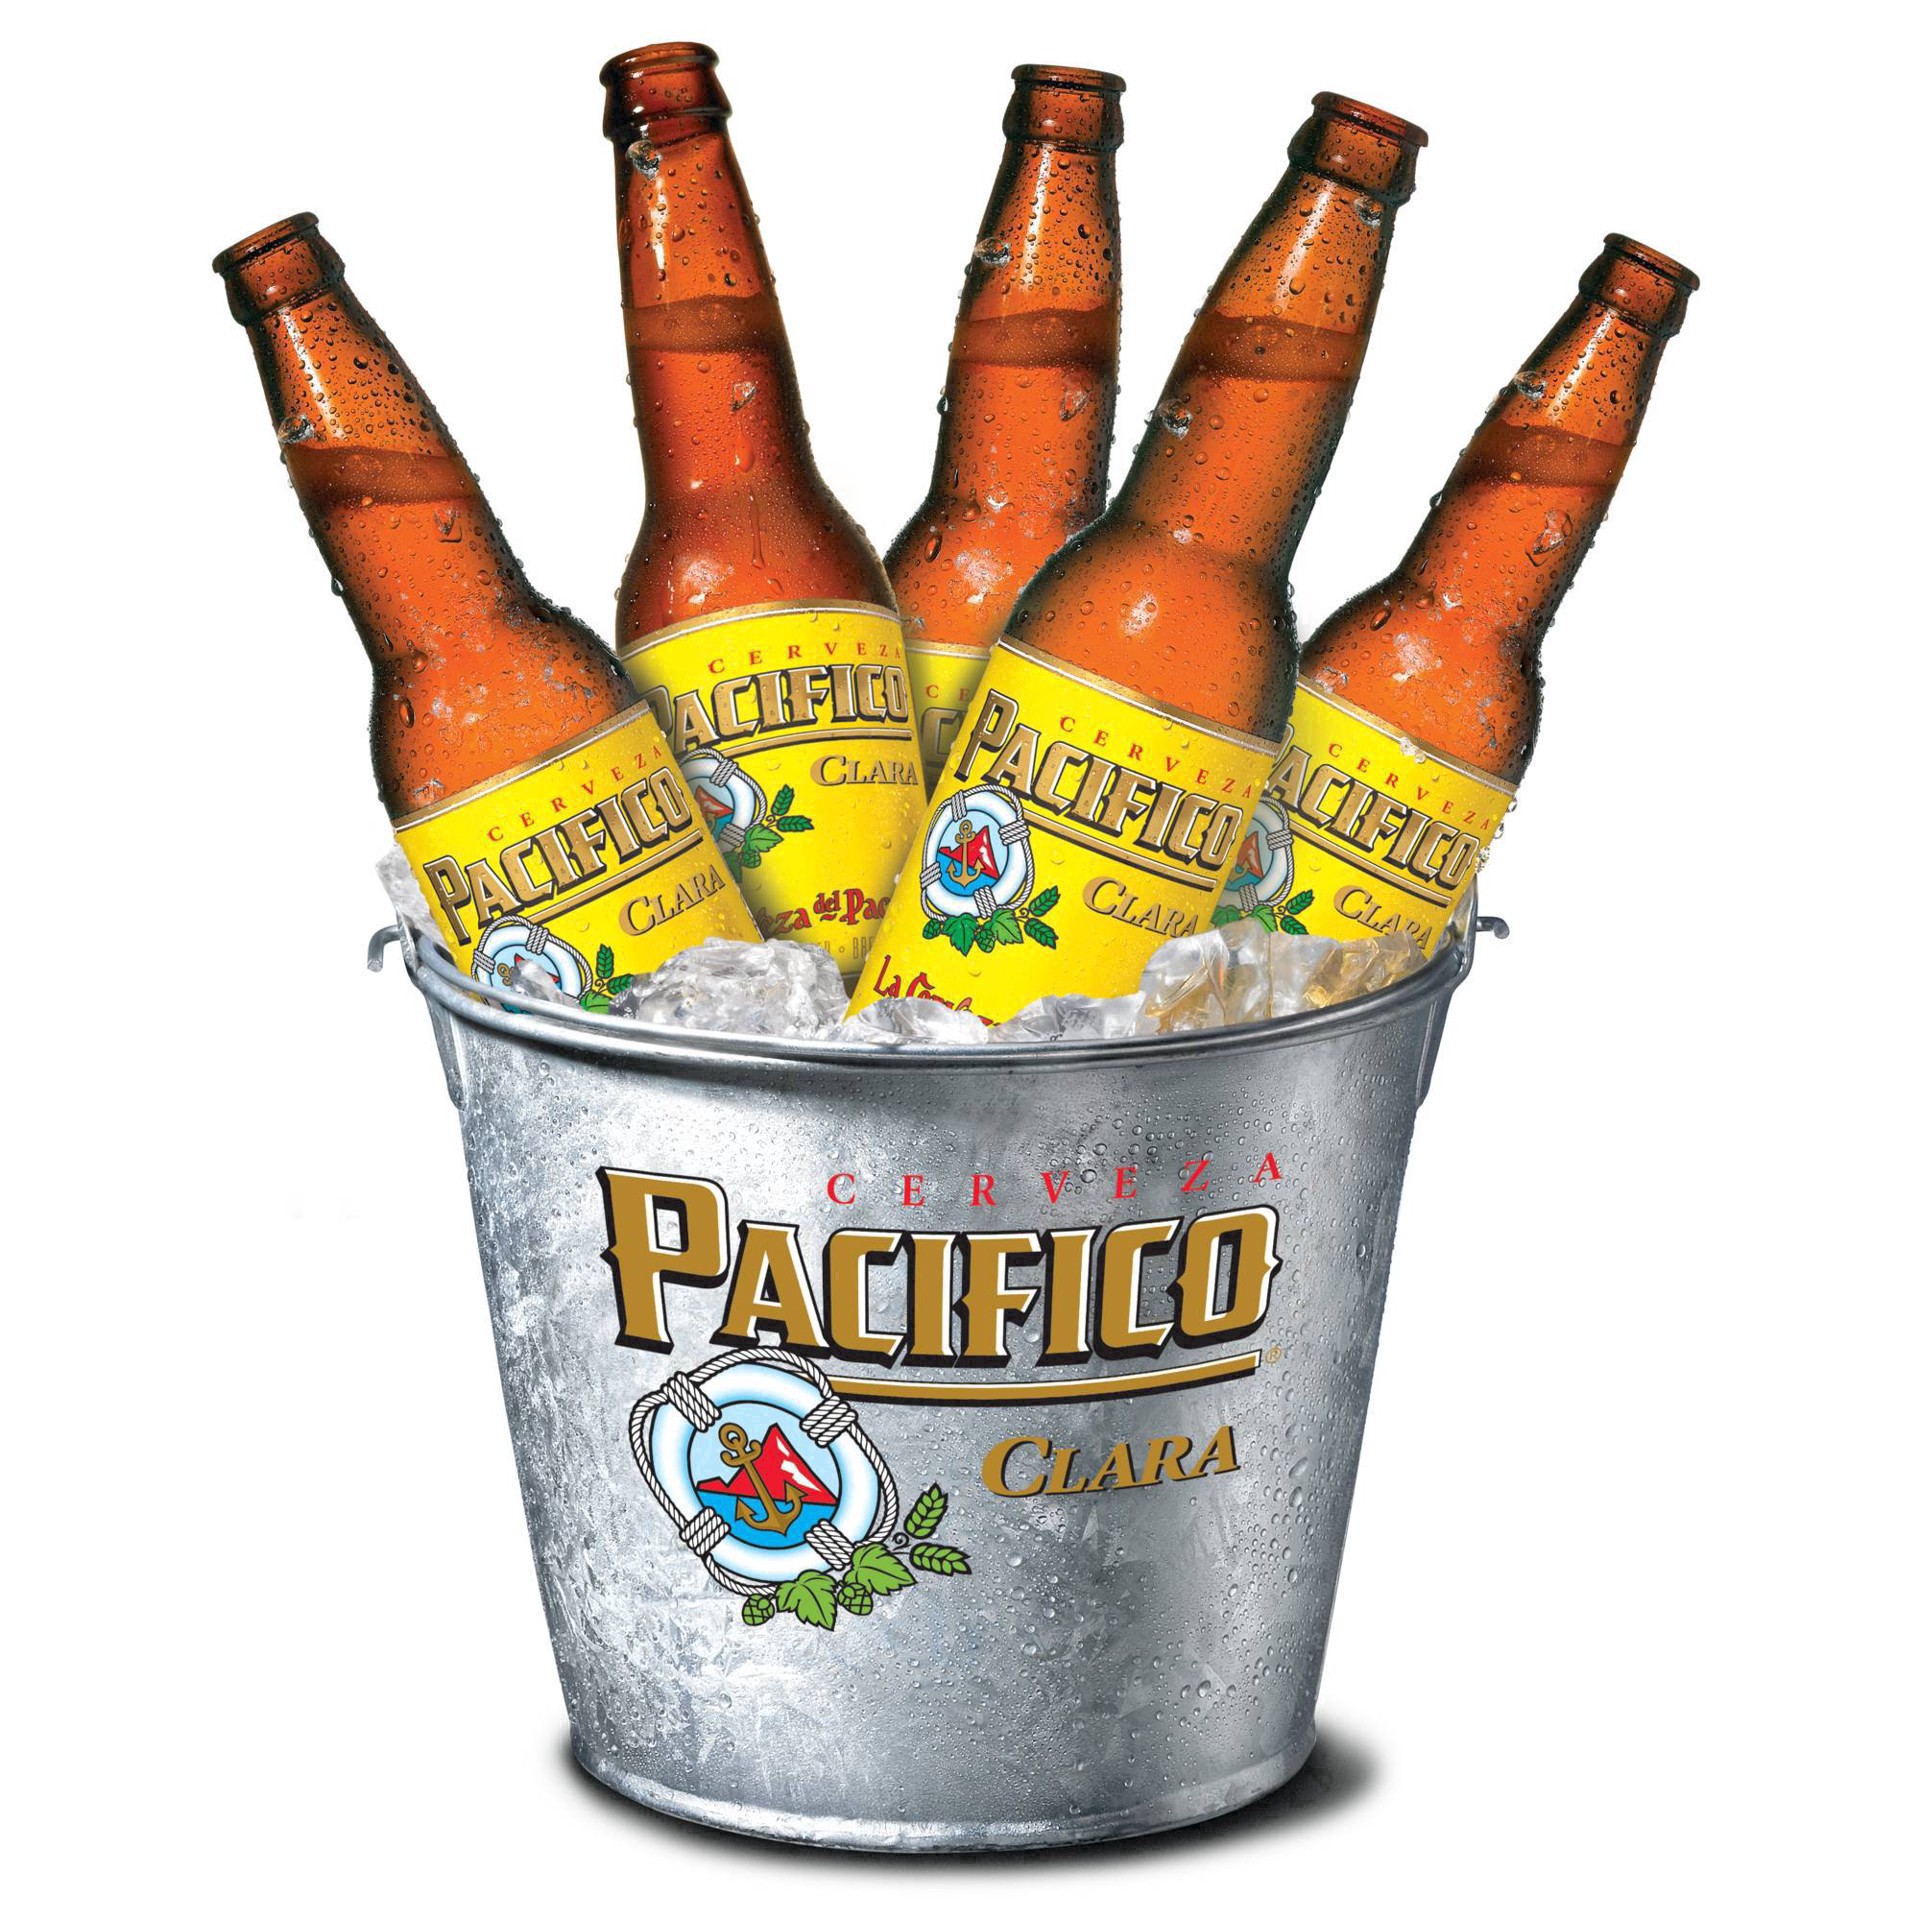 slide 37 of 79, Pacifico Clara Lager Mexican Beer Bottles, 12 ct; 12 oz